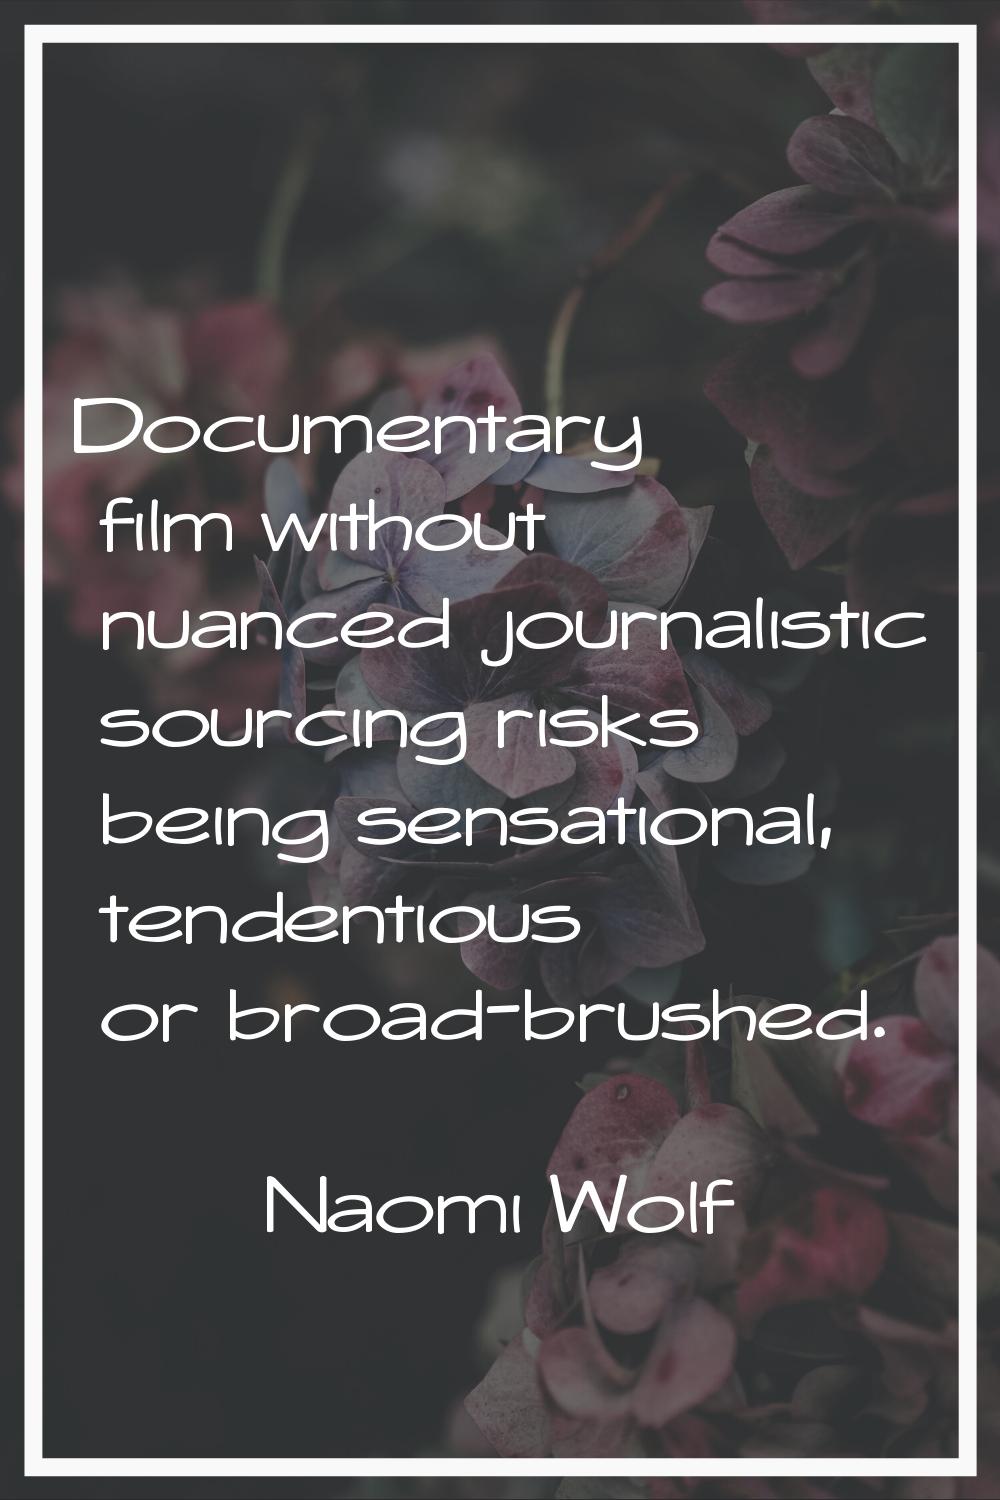 Documentary film without nuanced journalistic sourcing risks being sensational, tendentious or broa